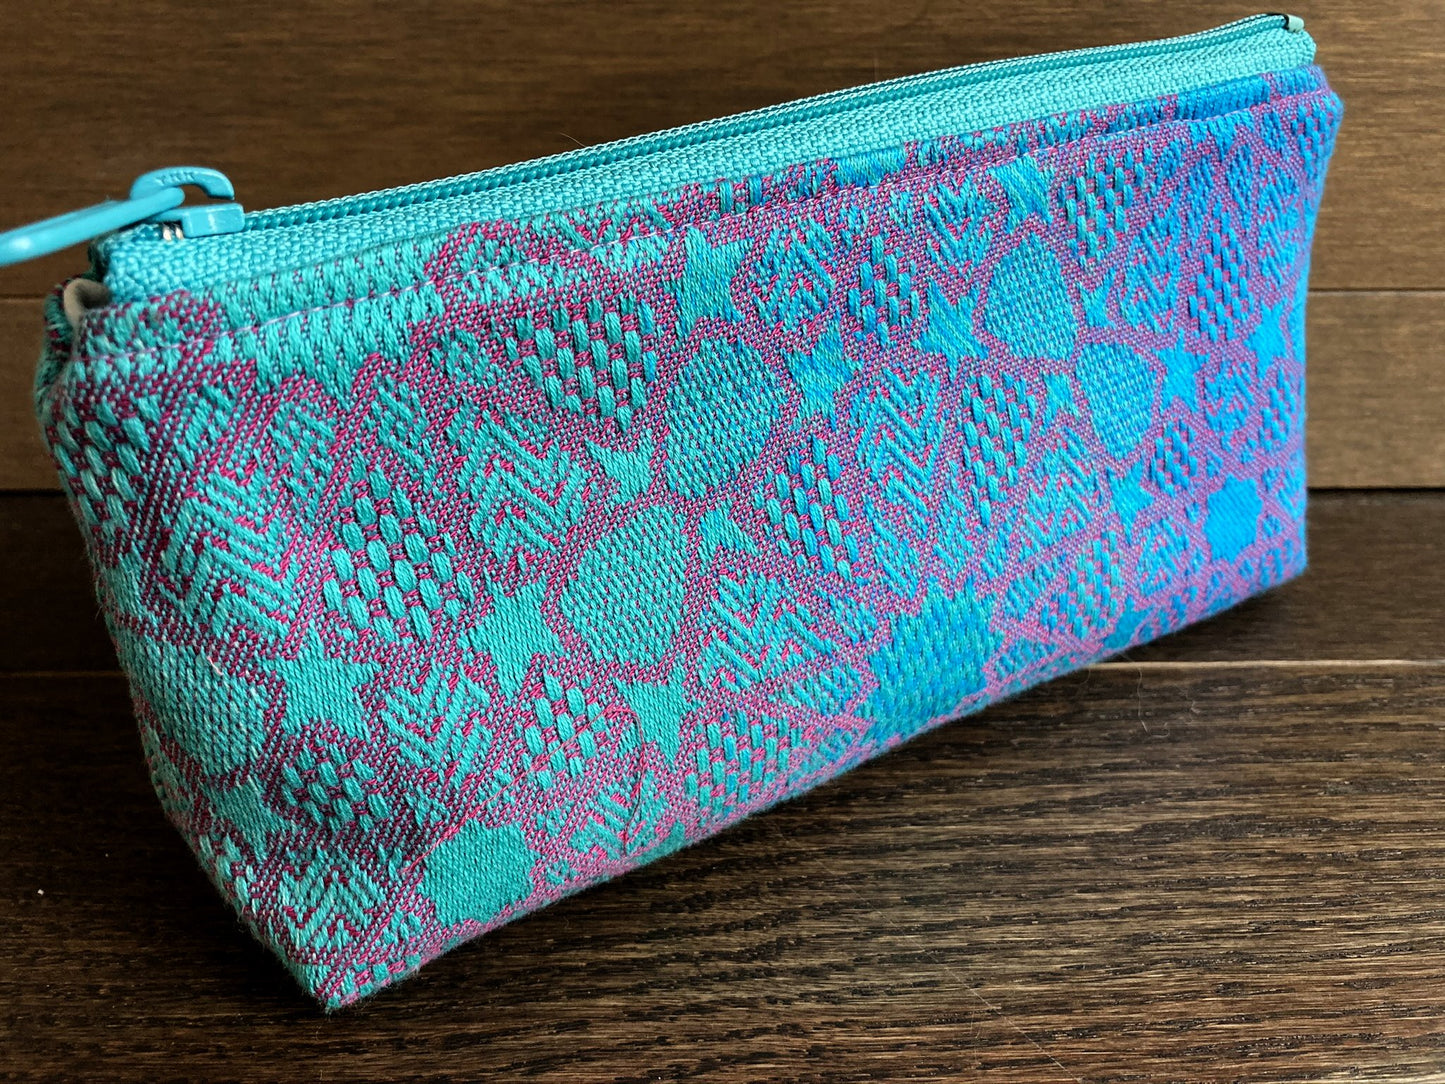 Vibrant Blues and Pinks Jacquard & PUL Lined Compact Zipper Bag